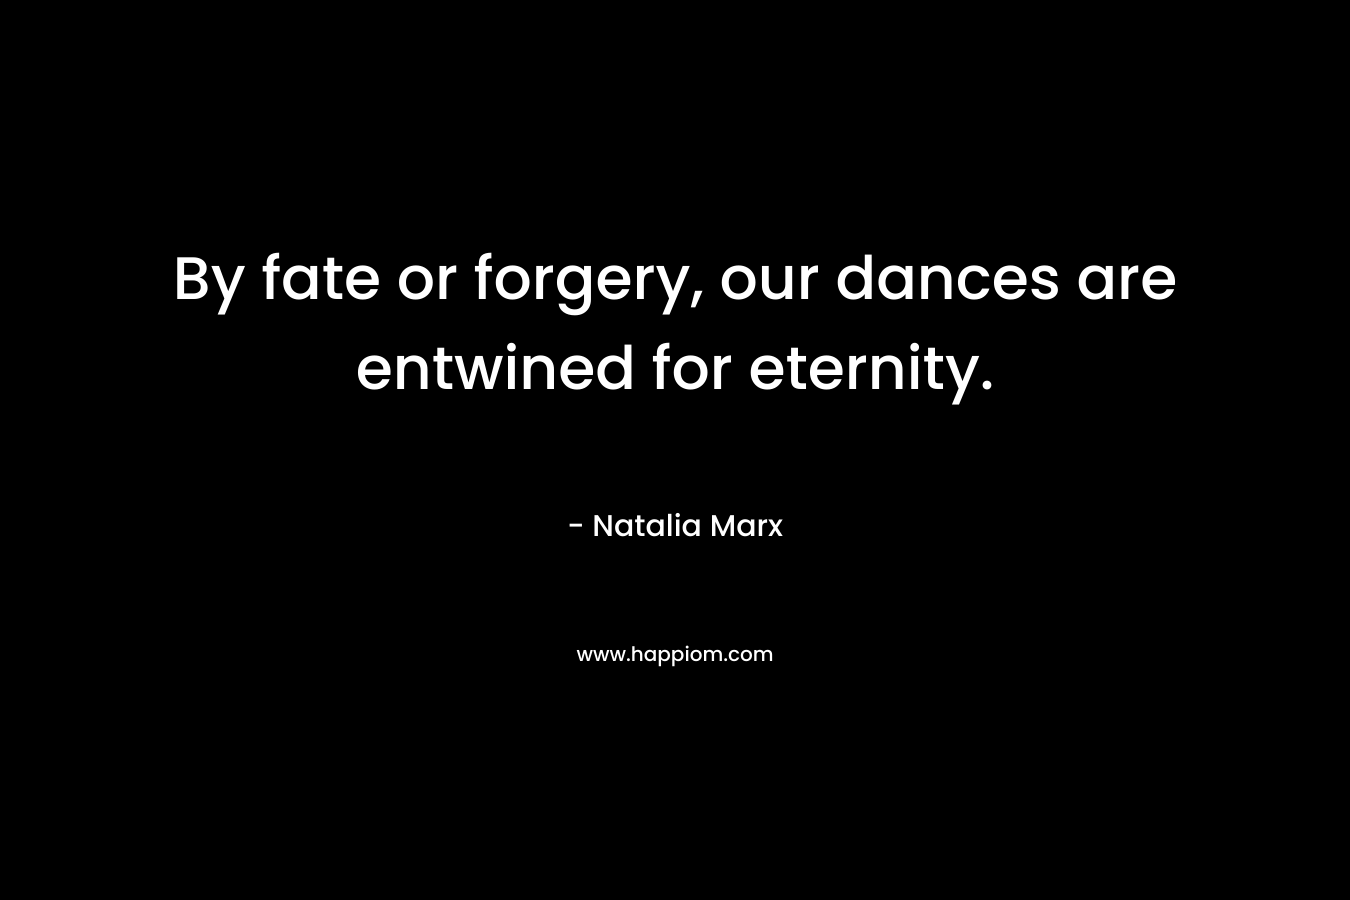 By fate or forgery, our dances are entwined for eternity.